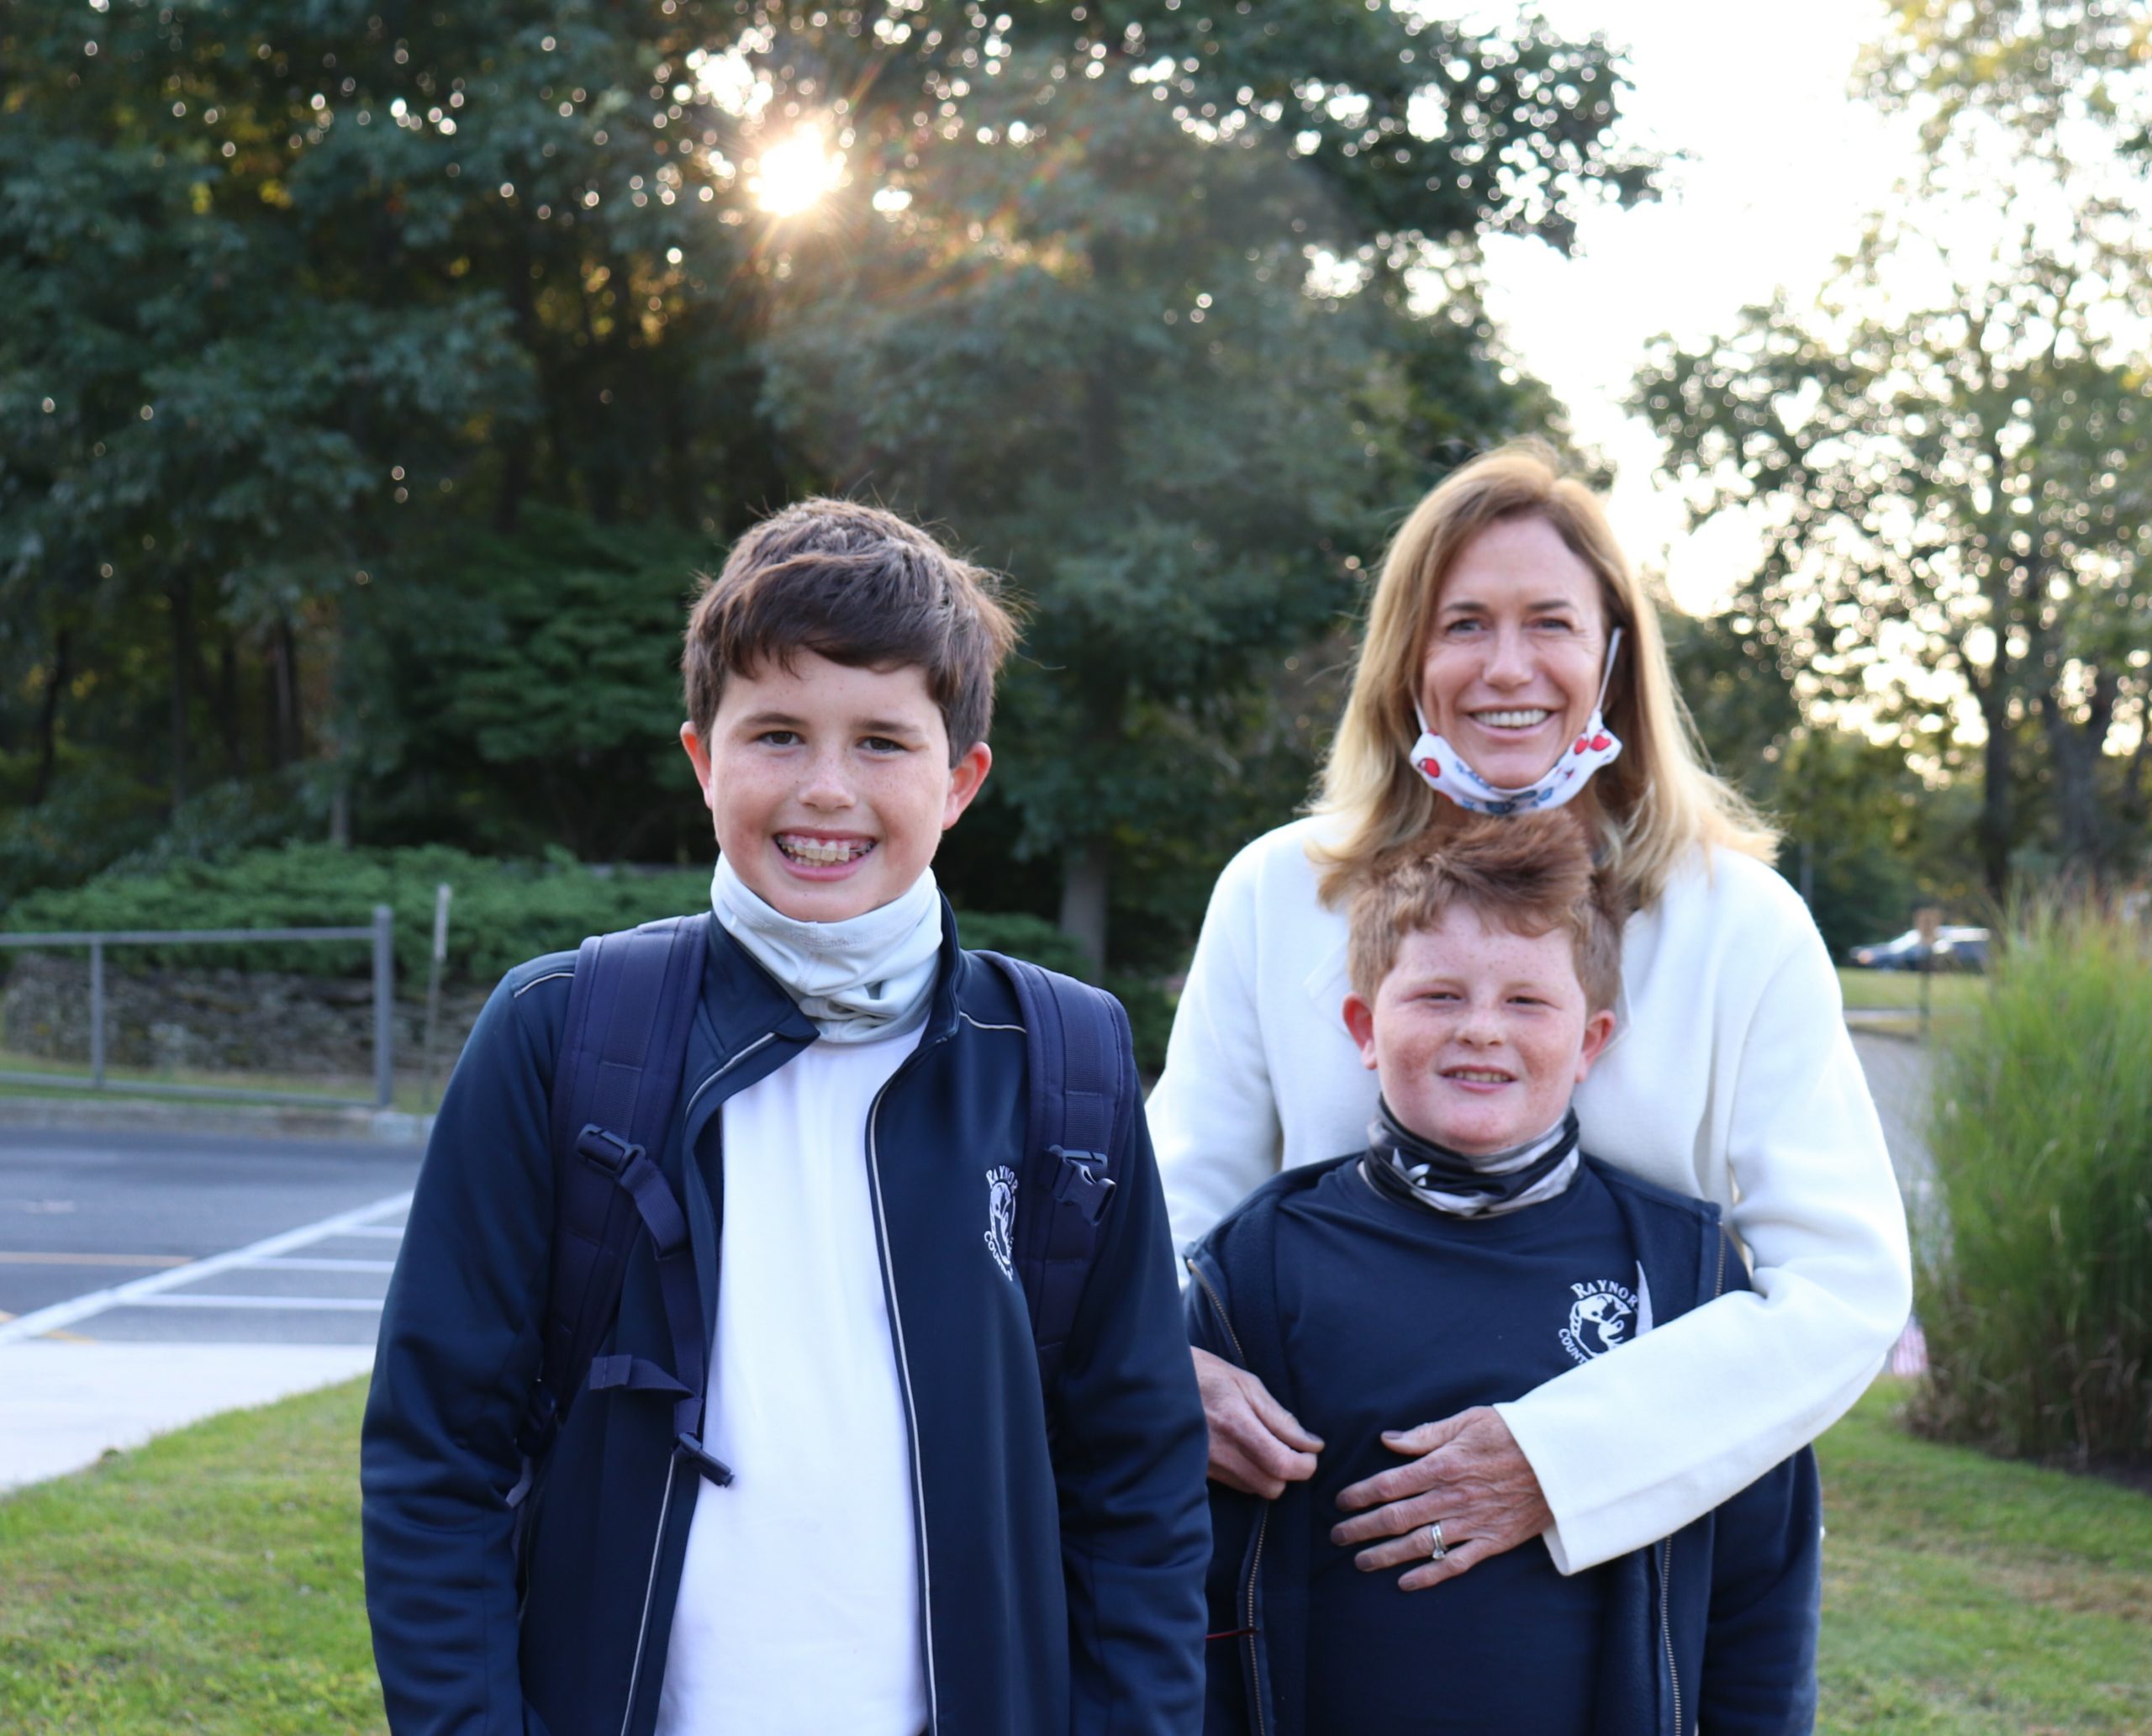 Raynor Country Day School parent, Michelle Kelly poses with her boys, fellow RCDS students, Sean and Kevin Kelly, before the school's 